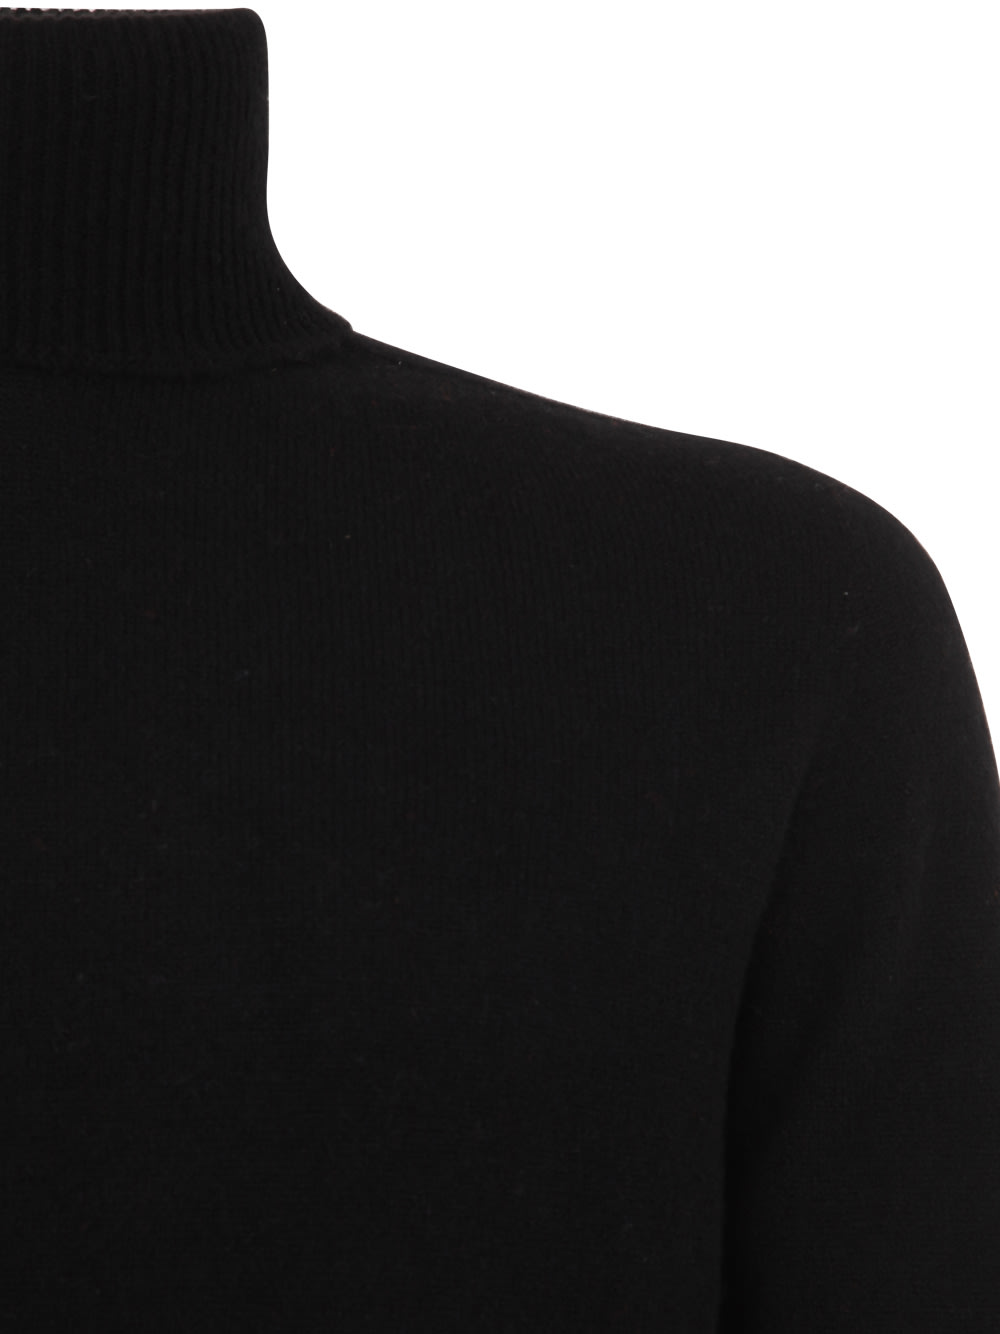 Shop Md75 Cashmere Turtle Neck Sweater In Black